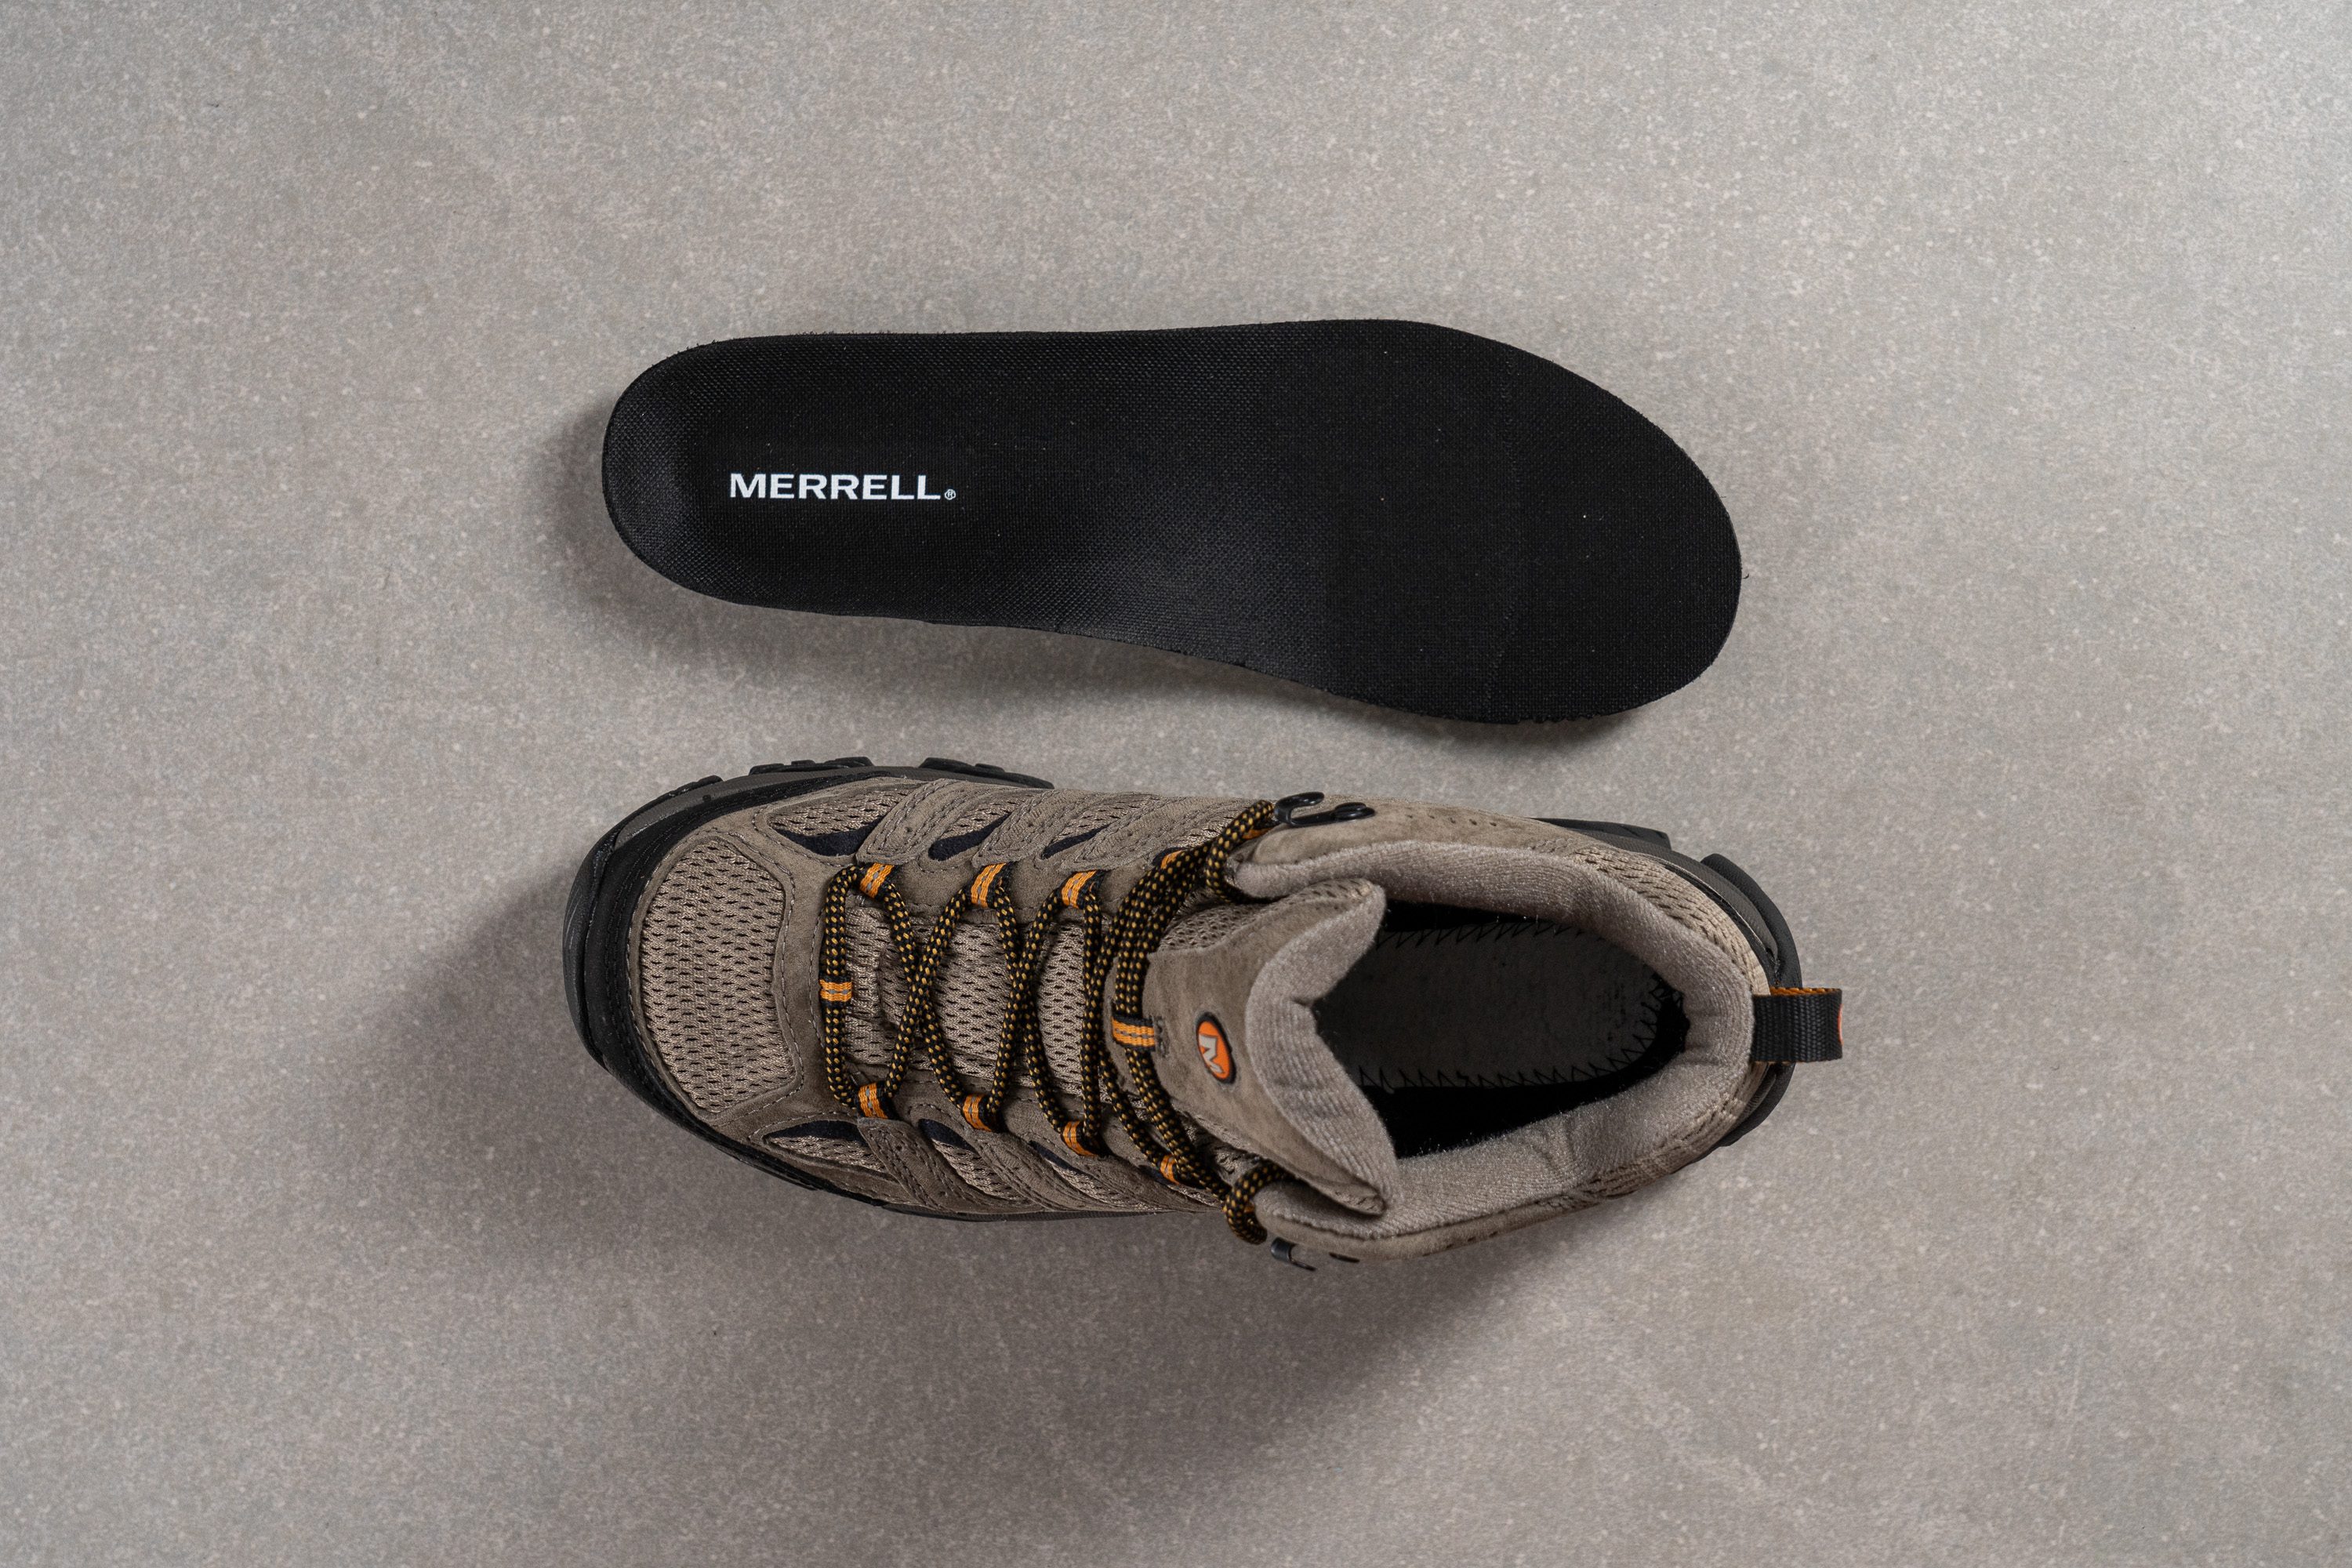 Merrell Moab 3 Mid GTX Removable insole